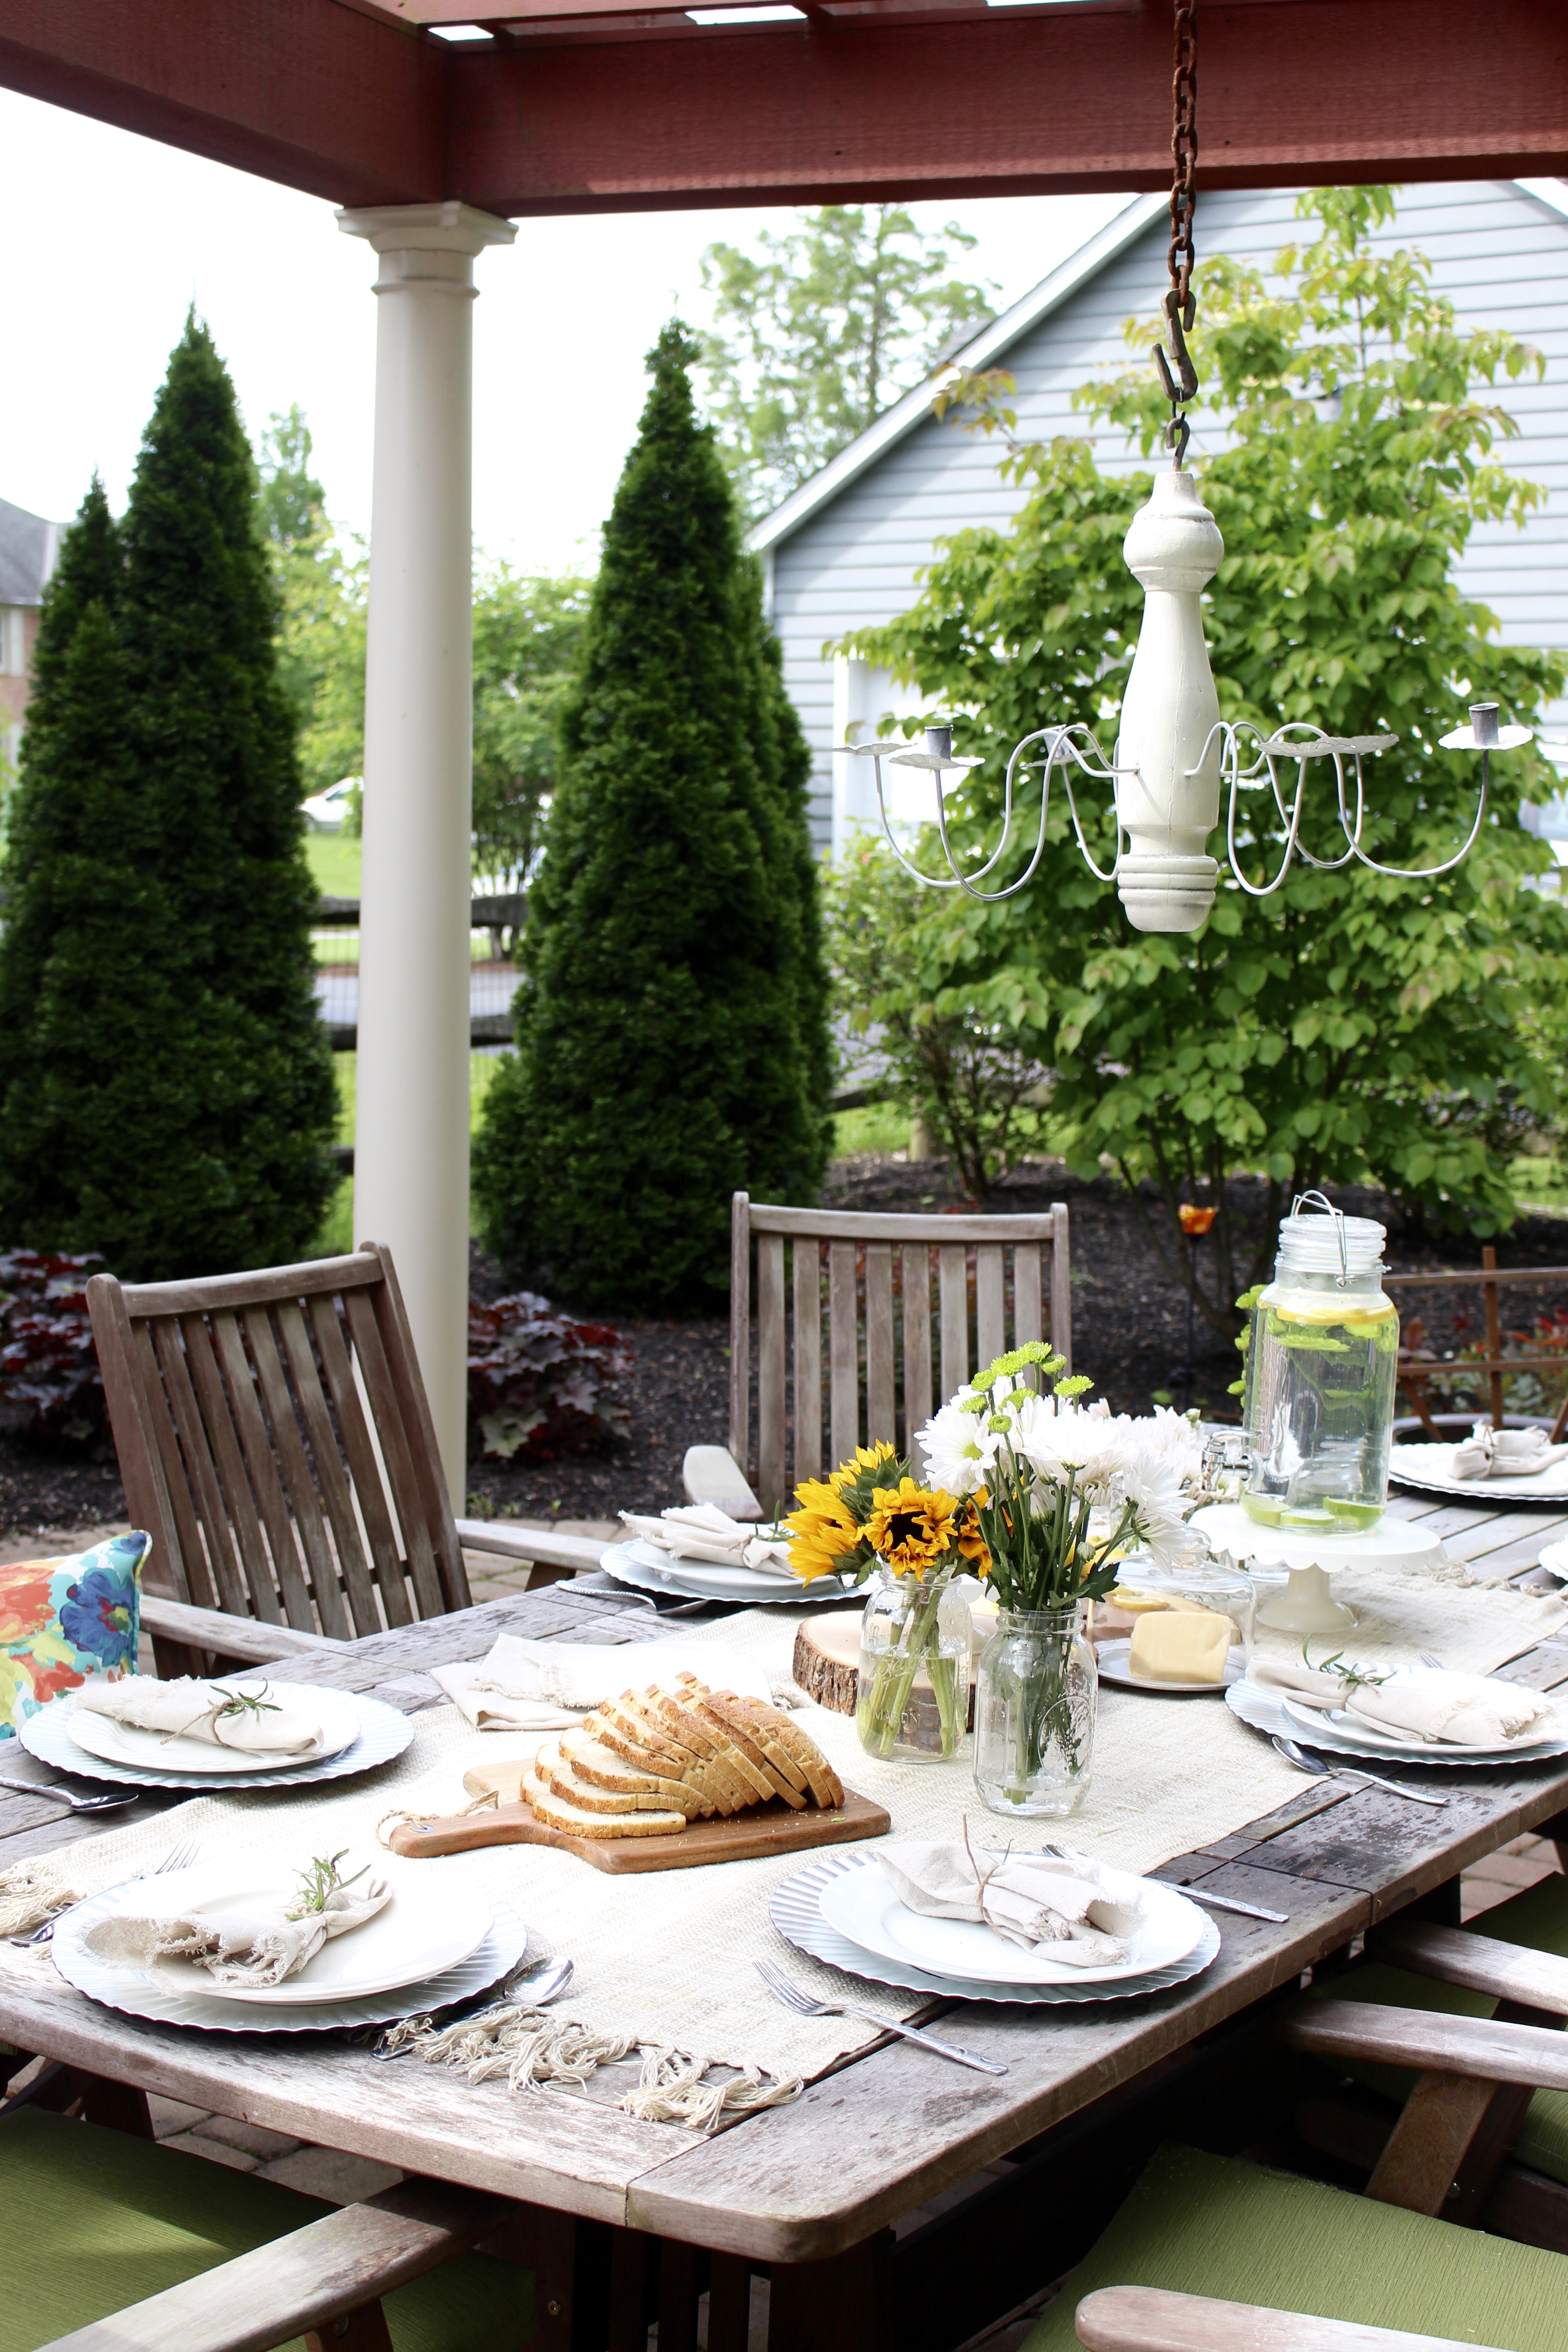 Summer Outdoor Refresh with At Home by www.whitecottagehomeandliving.com